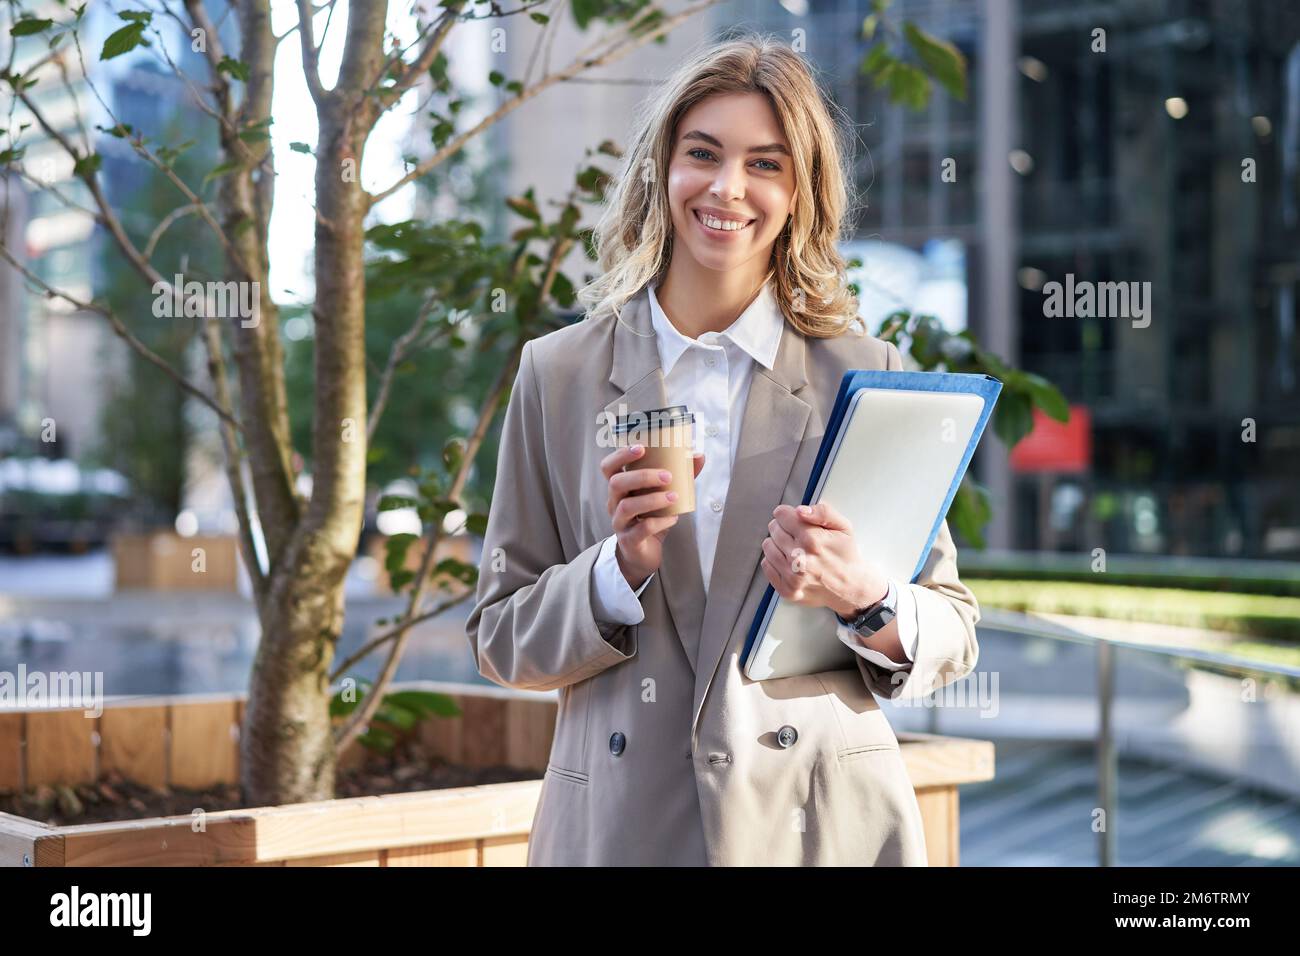 Young businesswoman standing on street with takeaway coffee, laptop and work documents, smiling Stock Photo